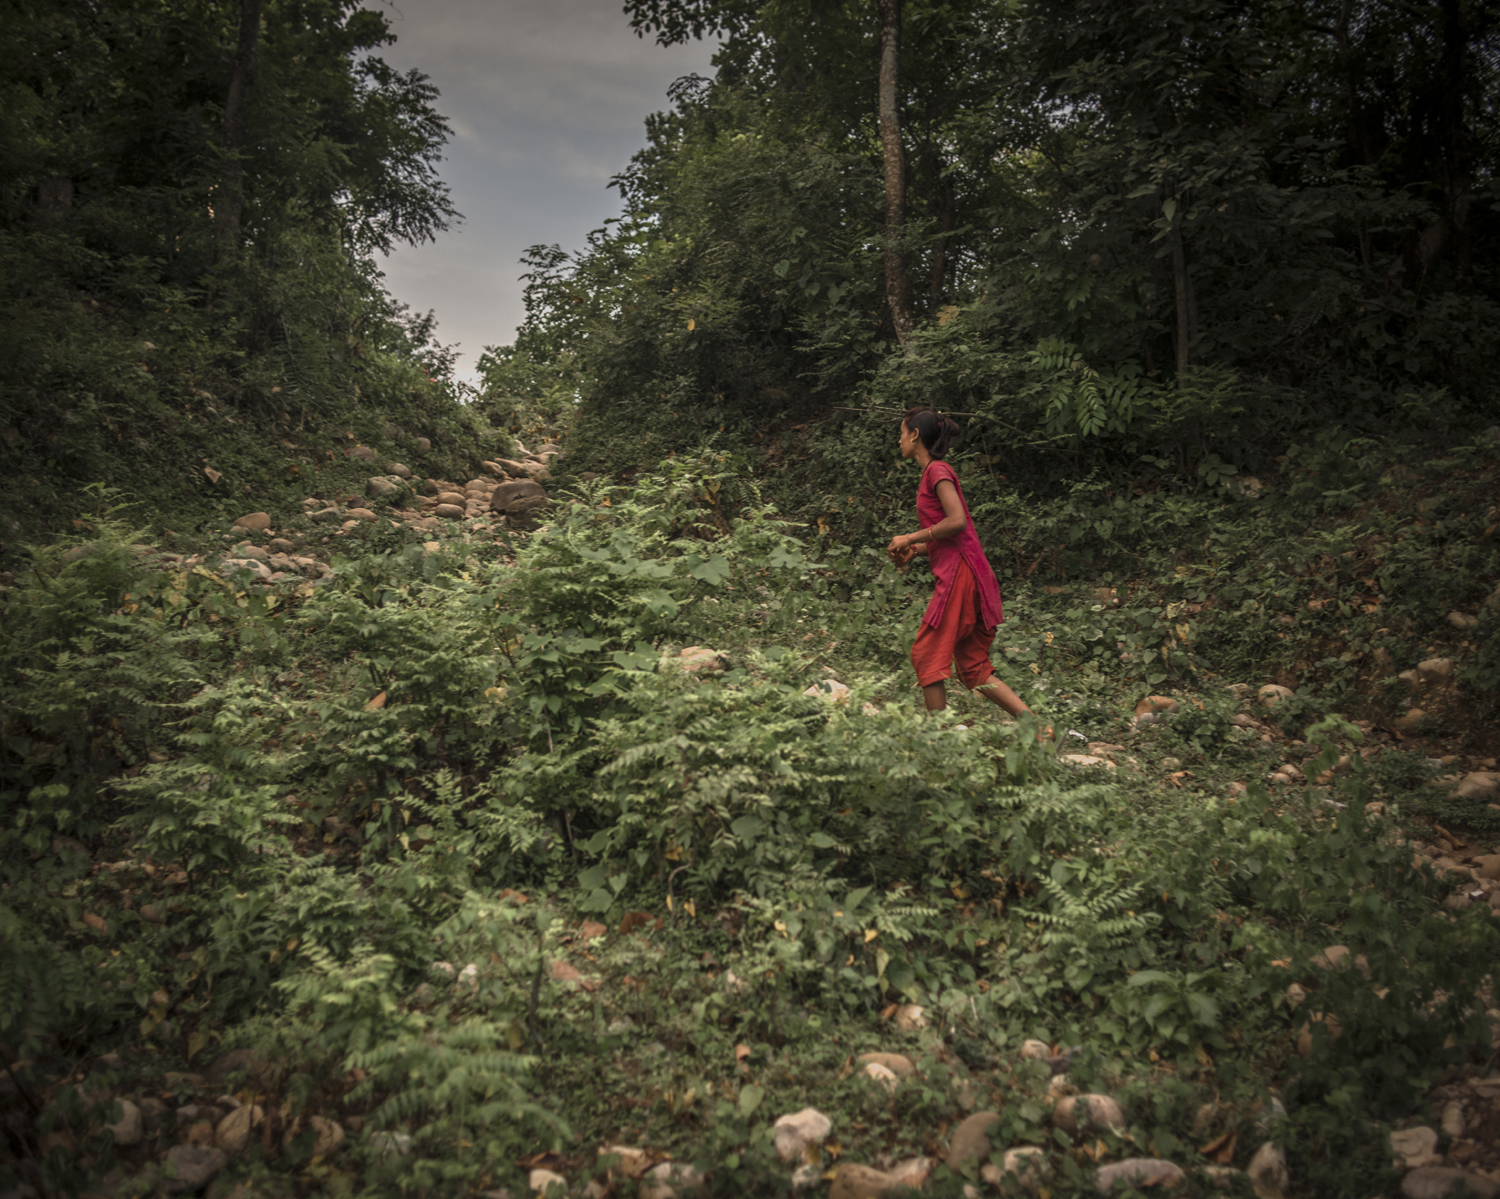 I wish sometimes my mother was here to take me home or give me medicines, especially when I am in pain. It’s dark, and there is no light. I feel so scared someone might come,  says Radha Bishwa Karma, 16.  Surkhet District.